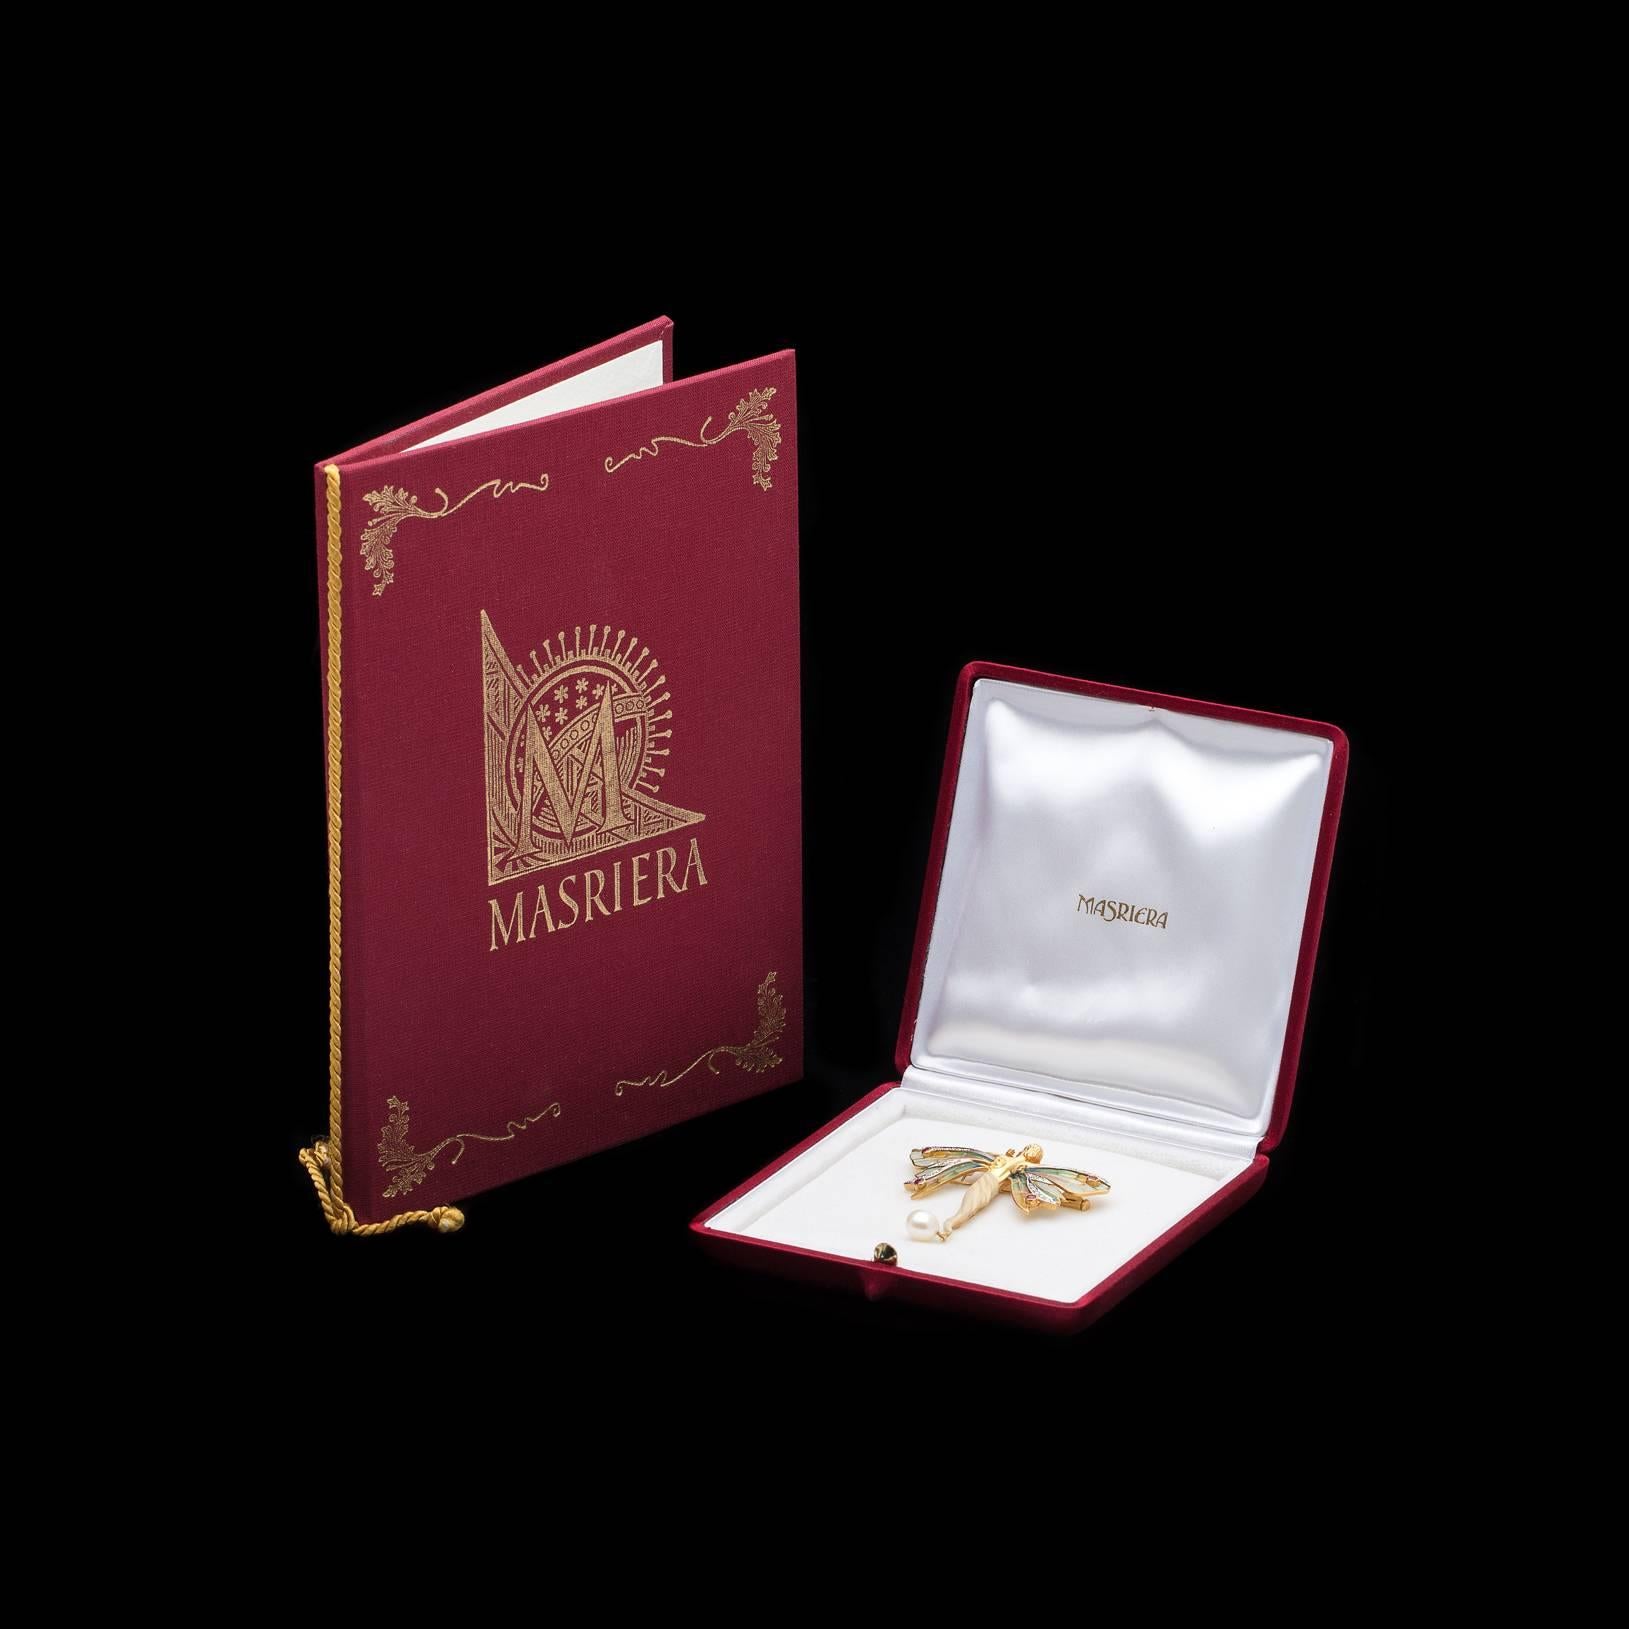 From Spain's master of Art Nouveau jewelry, Luis Masriera, comes this lovely 18 karat Yellow Gold, Diamond, Ruby Enamel and Pearl Pendant/Brooch with its original box and certificate of authenticity. The exceptionally intricate enamel work